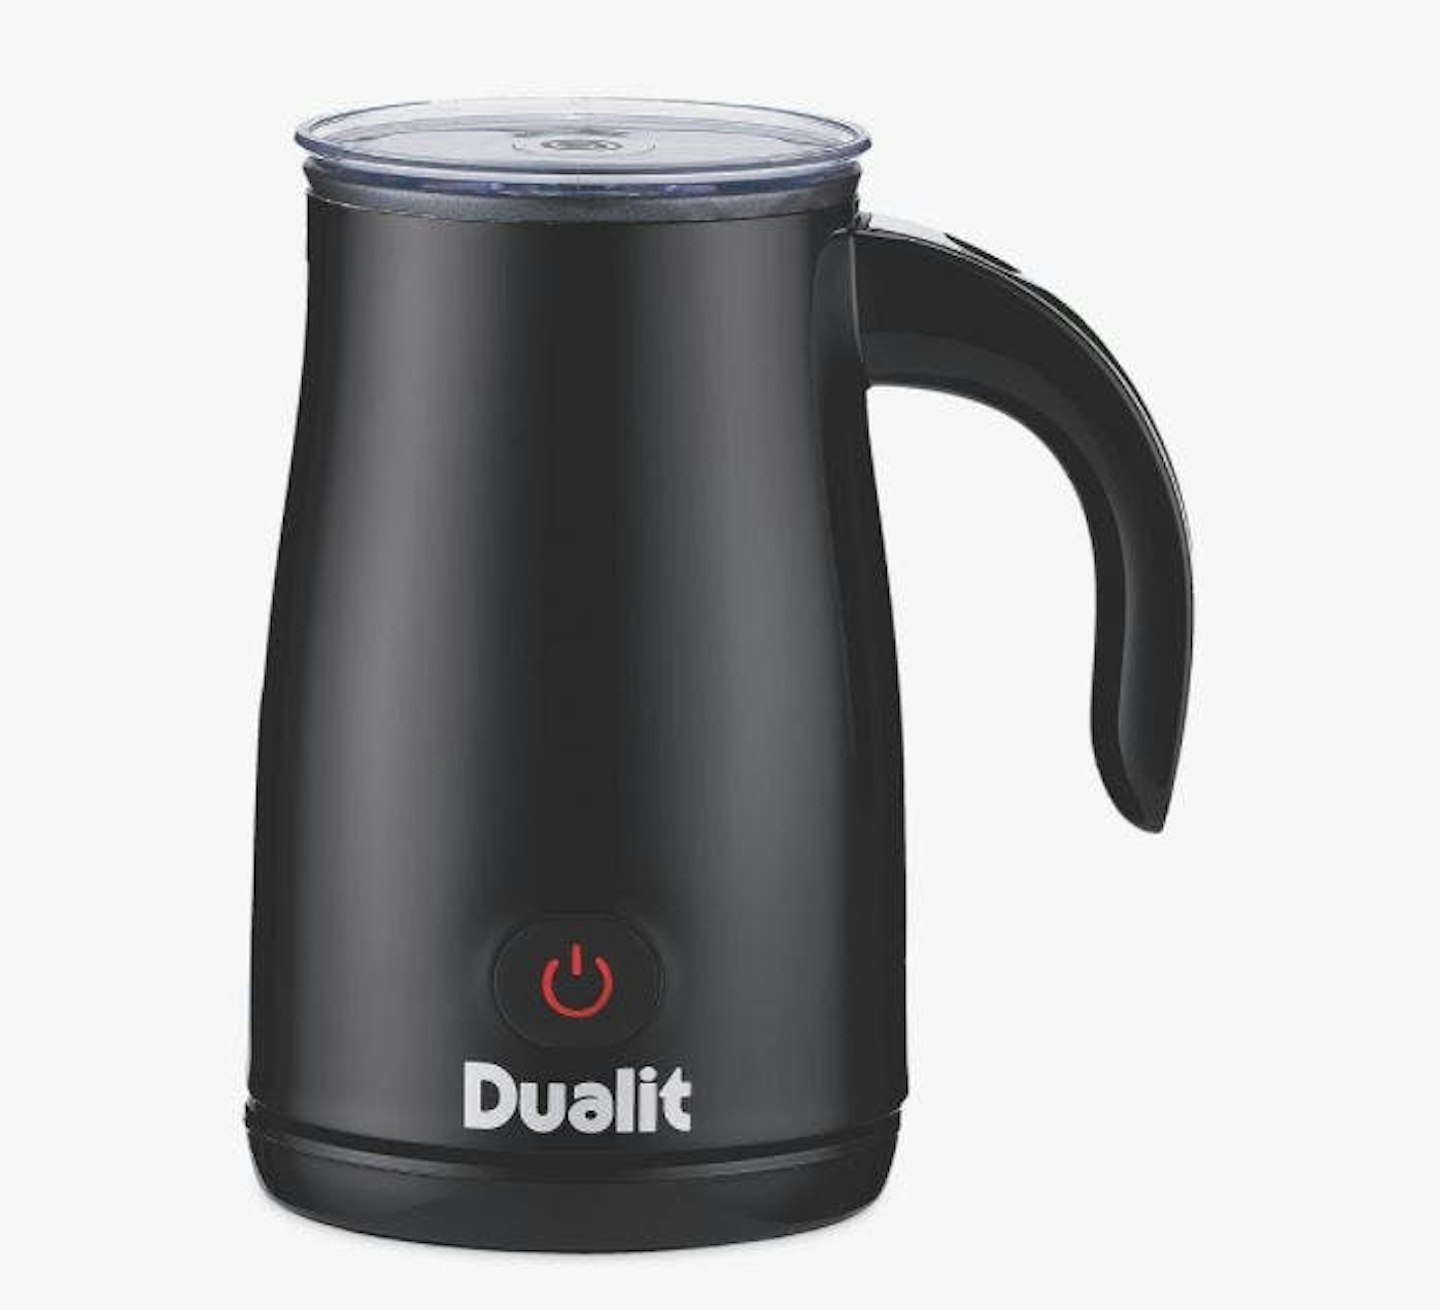 Best milk frothers: Dualit Milk Frother